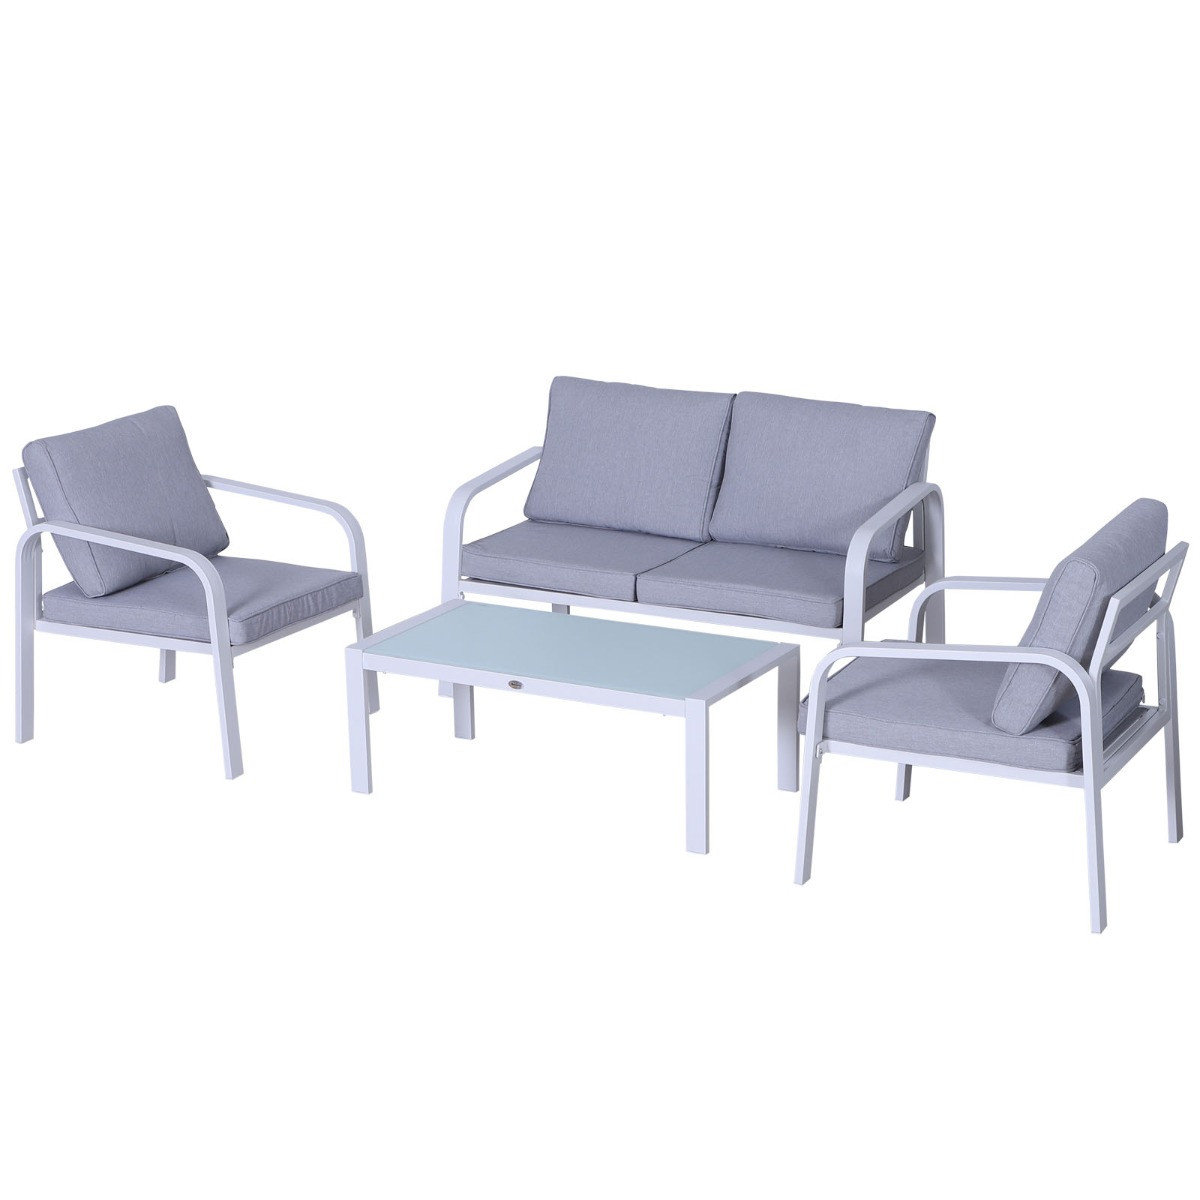 Outsunny Pe Rattan Table And Chairs Set, 4 Seater - White/Grey>